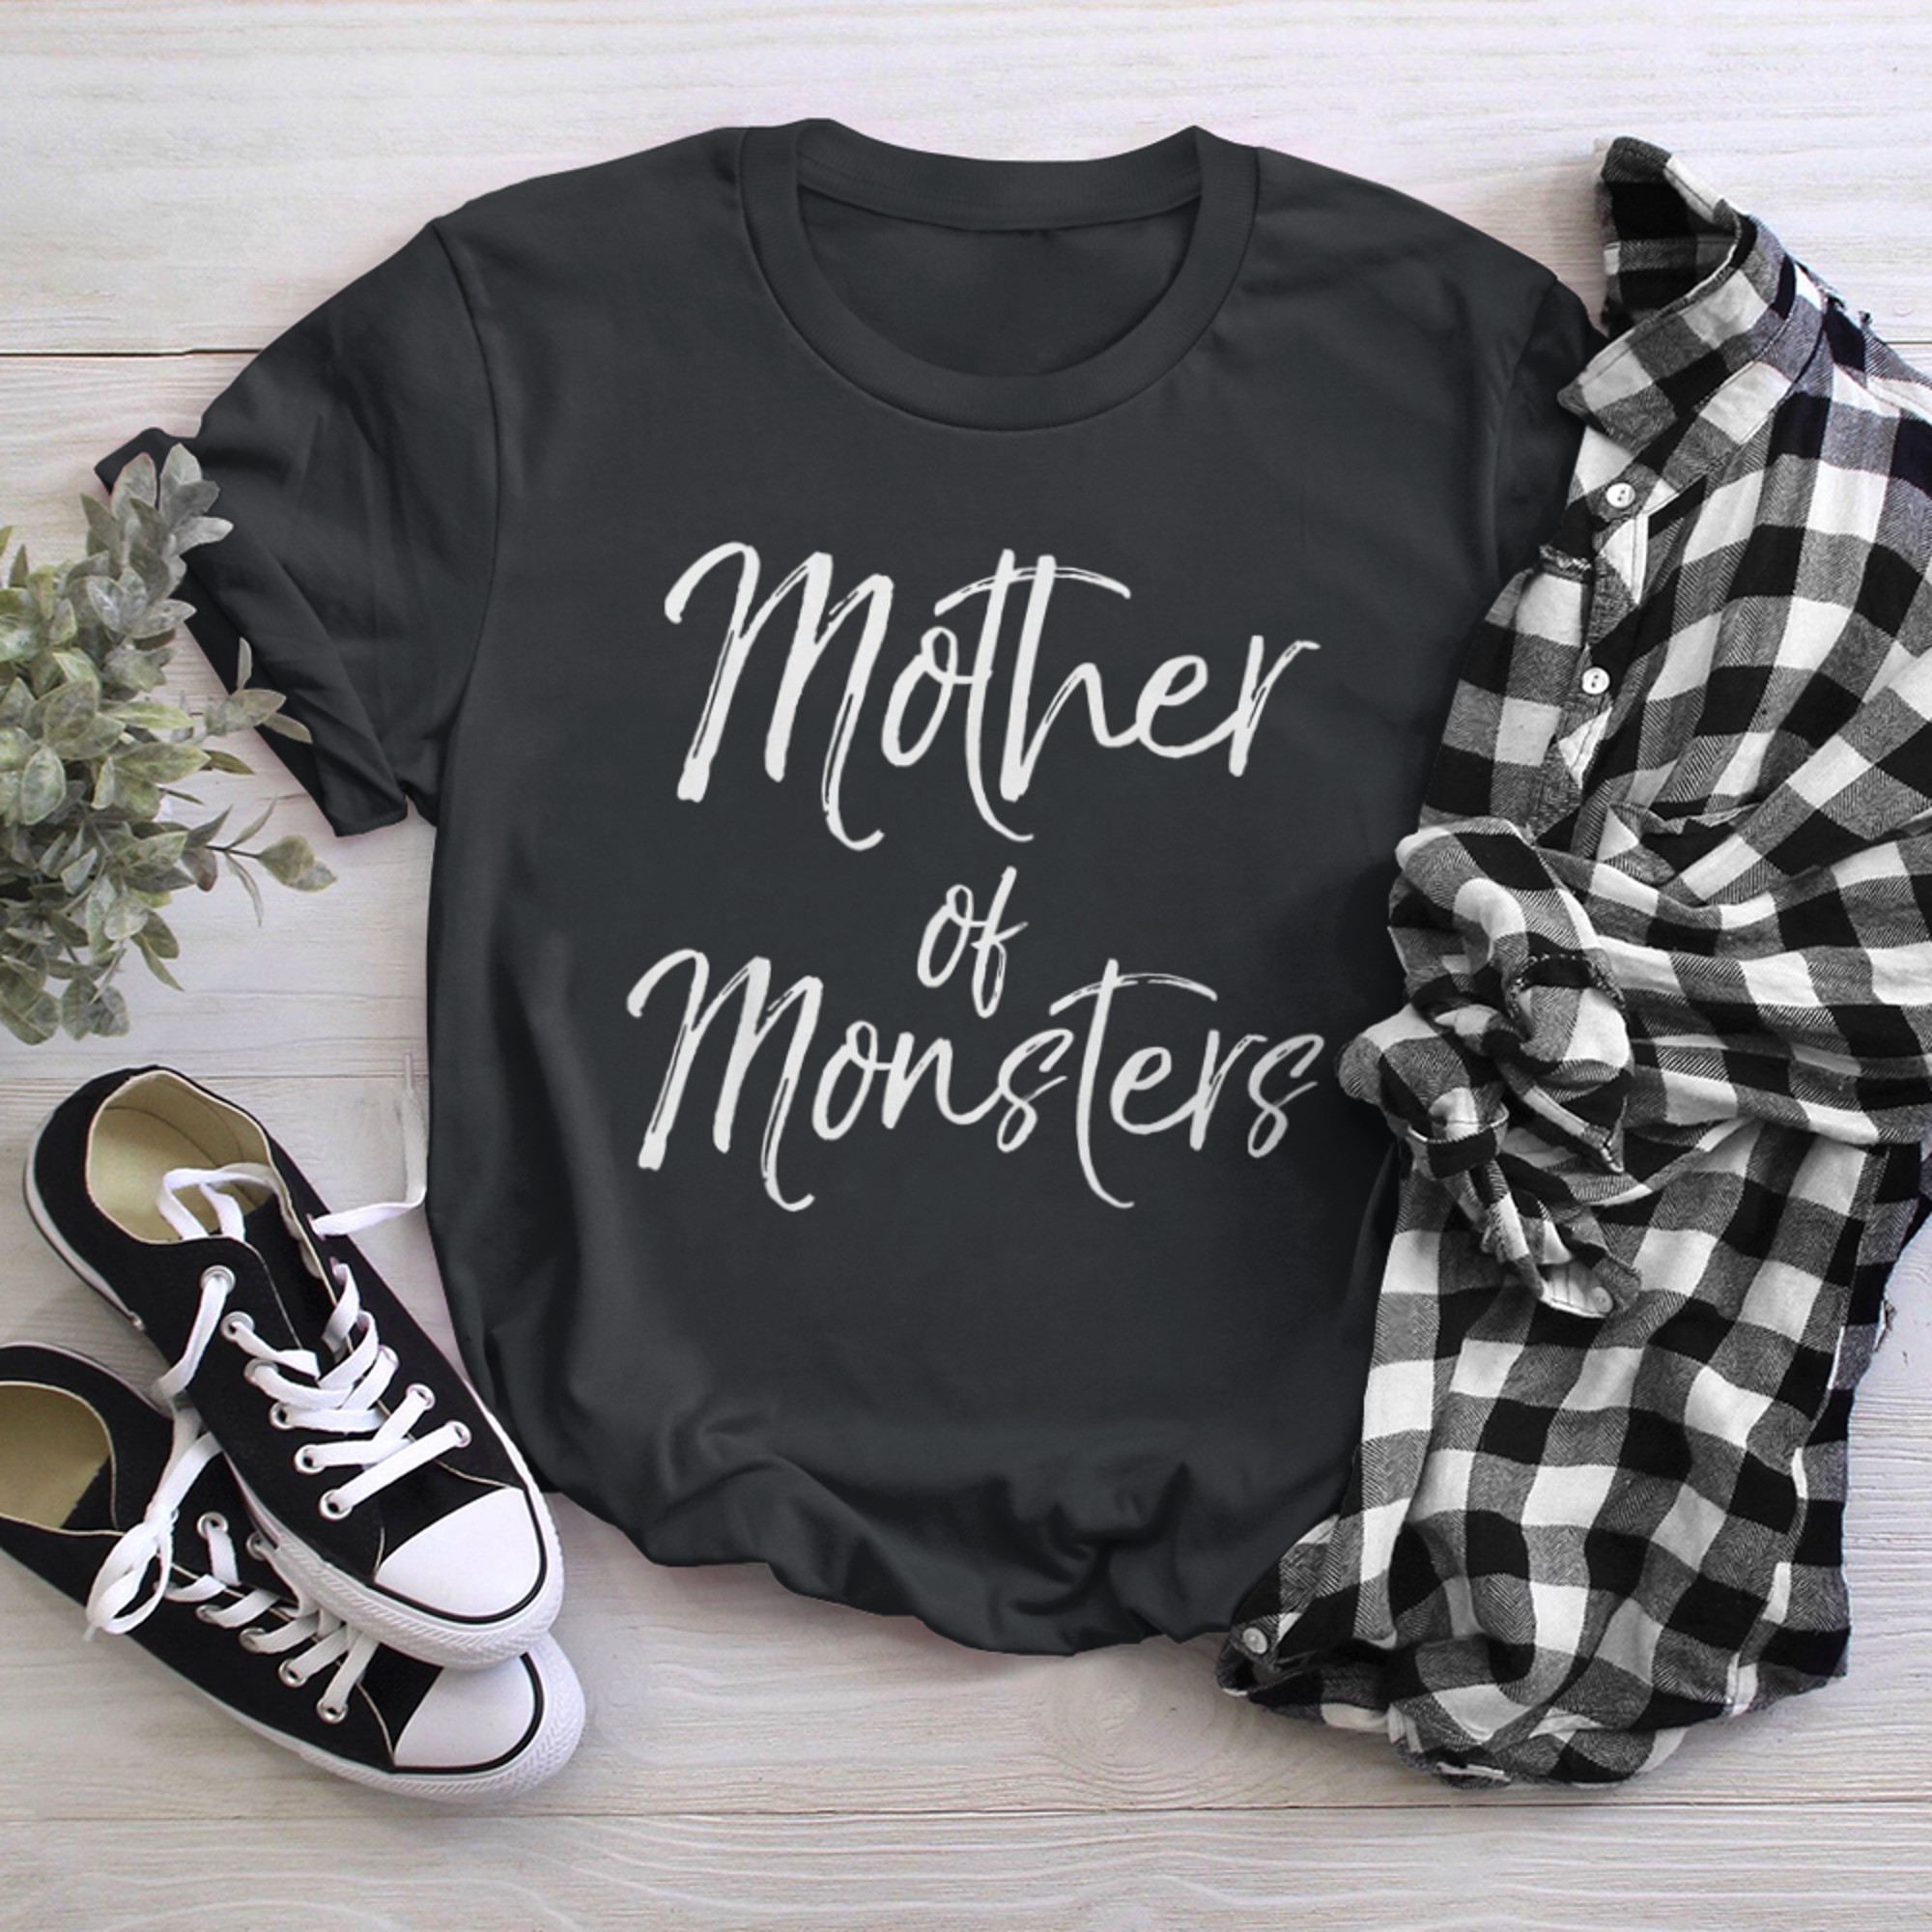 Mom of for Mother's Day Funny Mother of Monsters t-shirt black